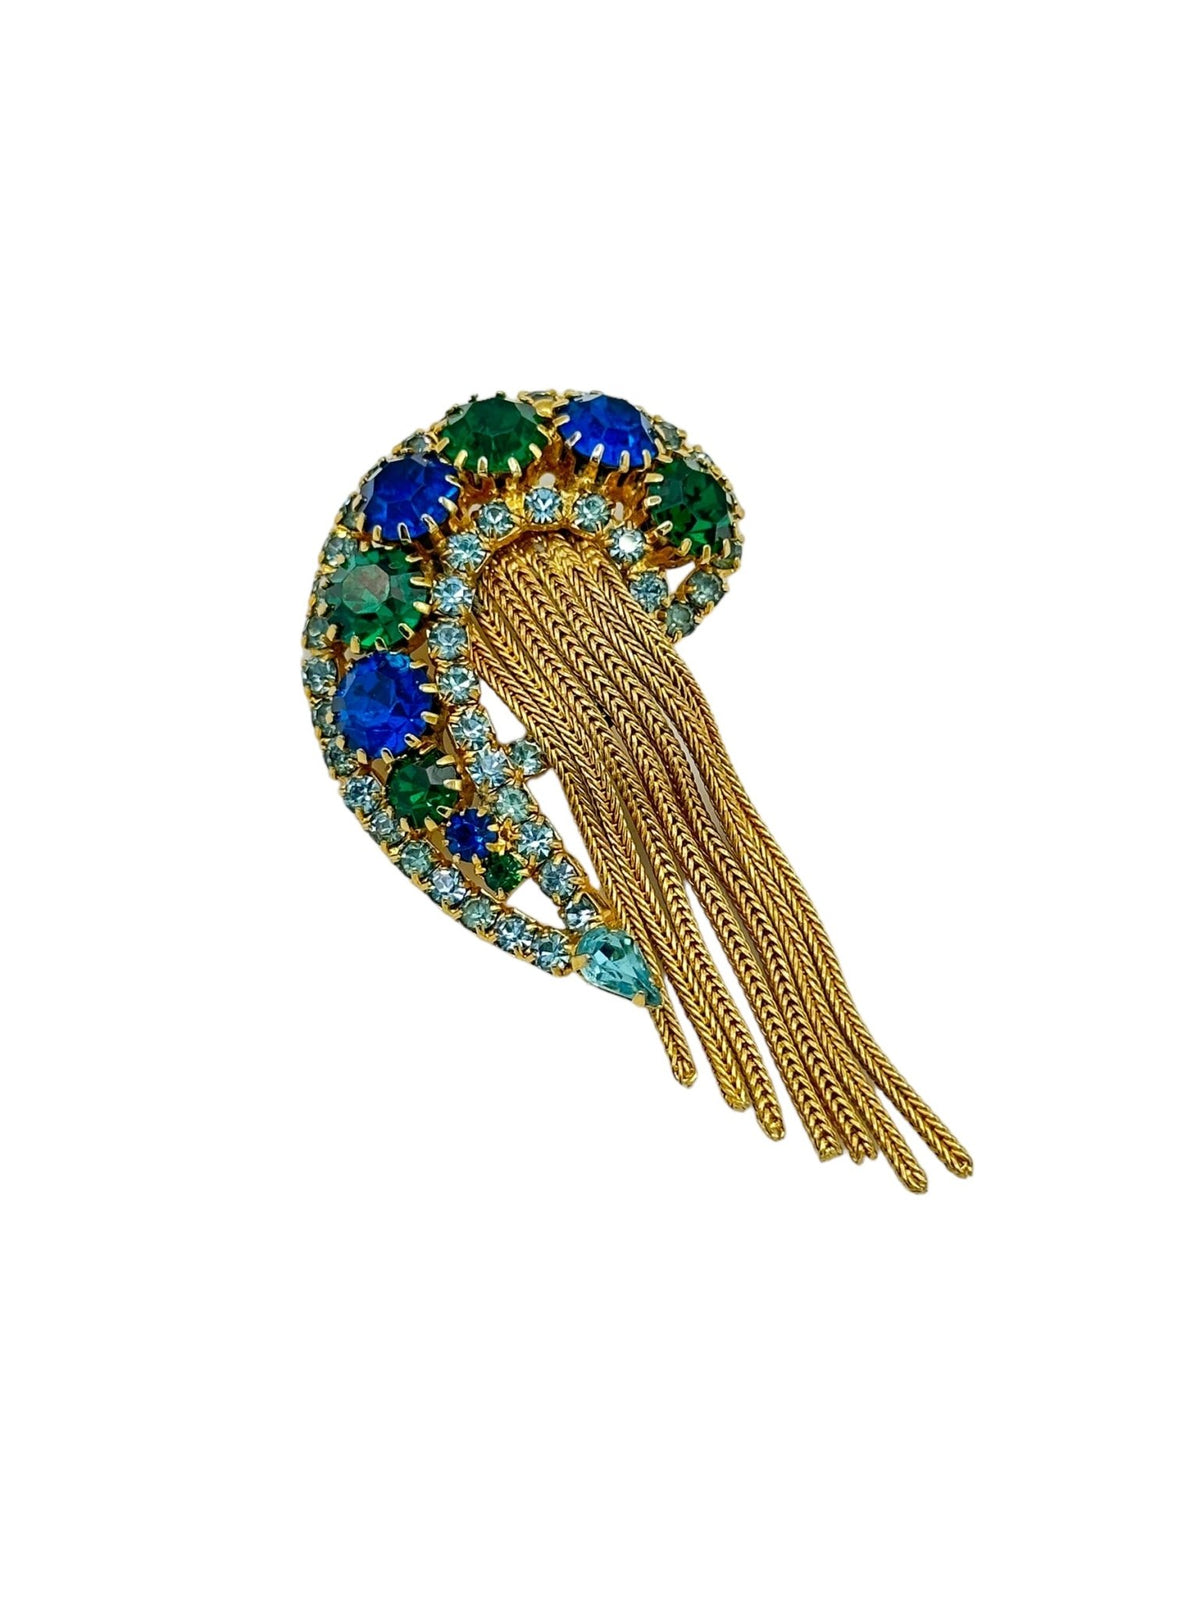 D&E Paisley Blue Green Rhinestone Fringe Vintage Brooch Pin - 24 Wishes Vintage Jewelry